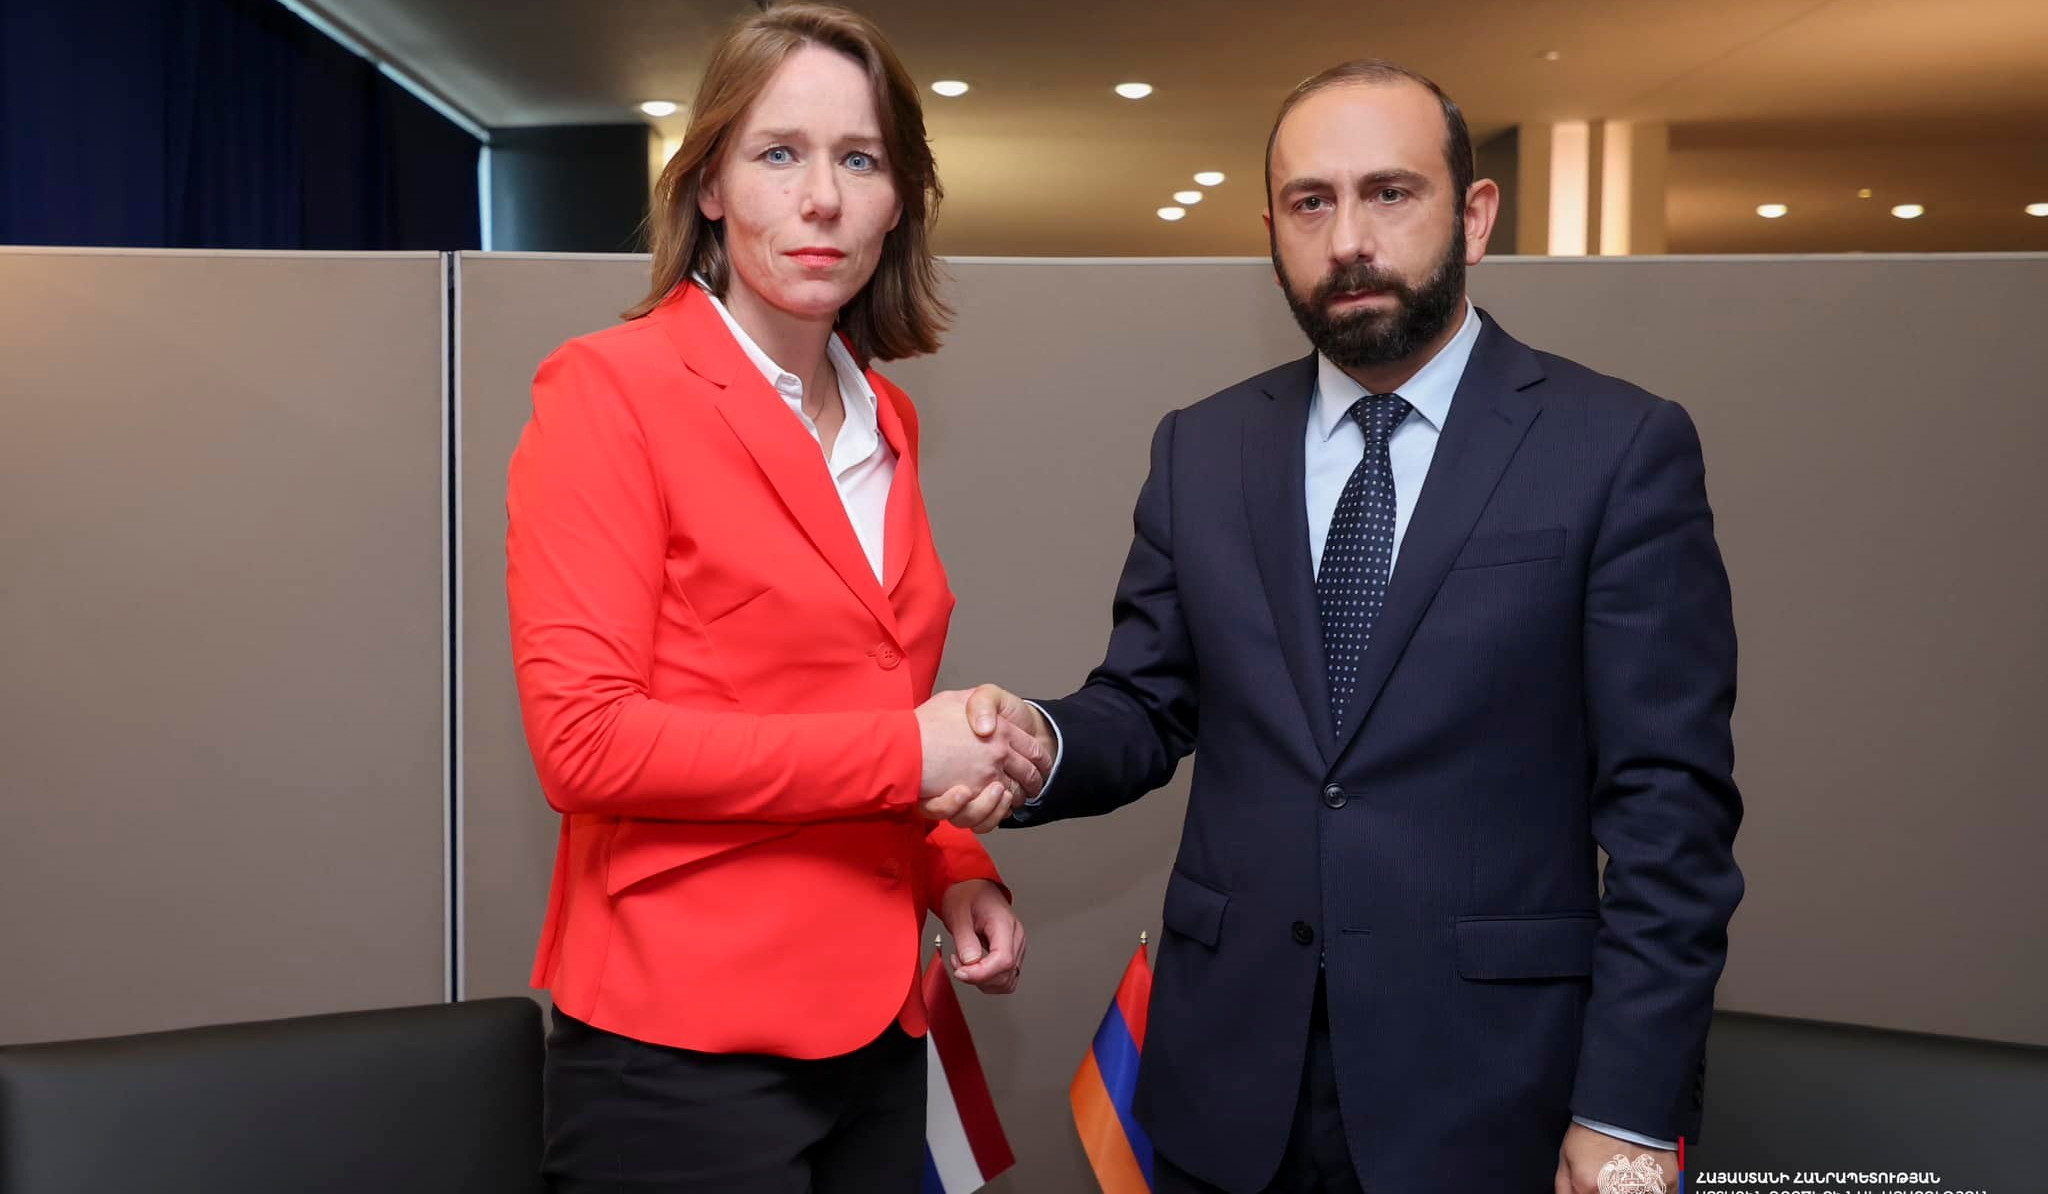 Azerbaijan aims to subject 120,000 people of Nagorno-Karabakh to ethnic cleansing: Ararat Mirzoyan to Minister of Foreign Affairs of Netherlands